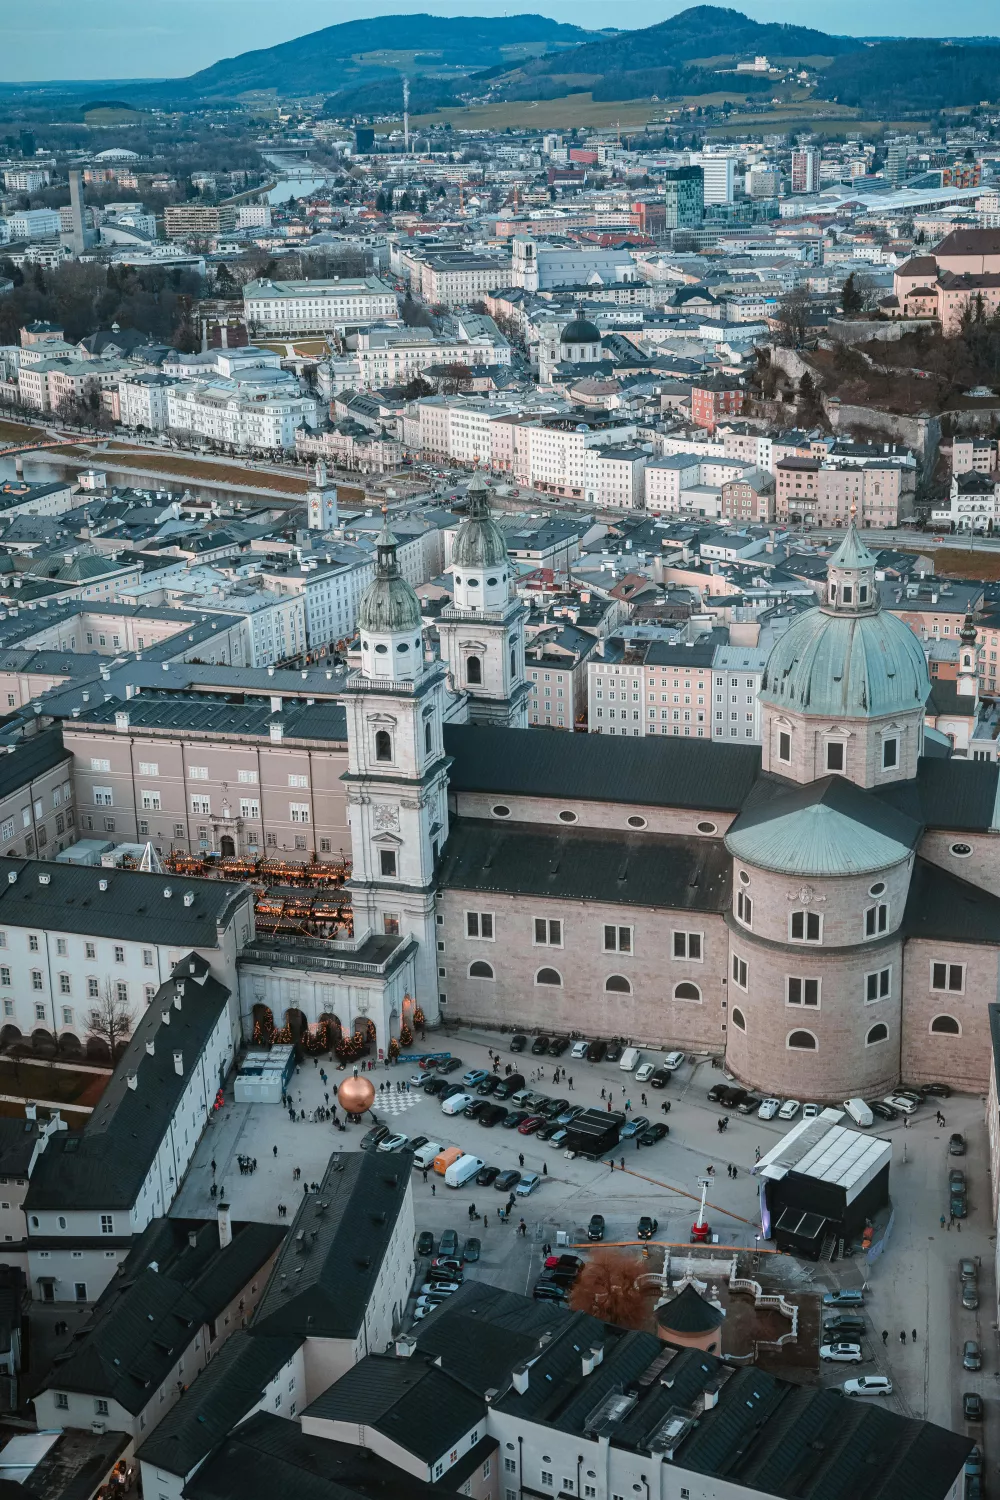 View of the center of Salzburg